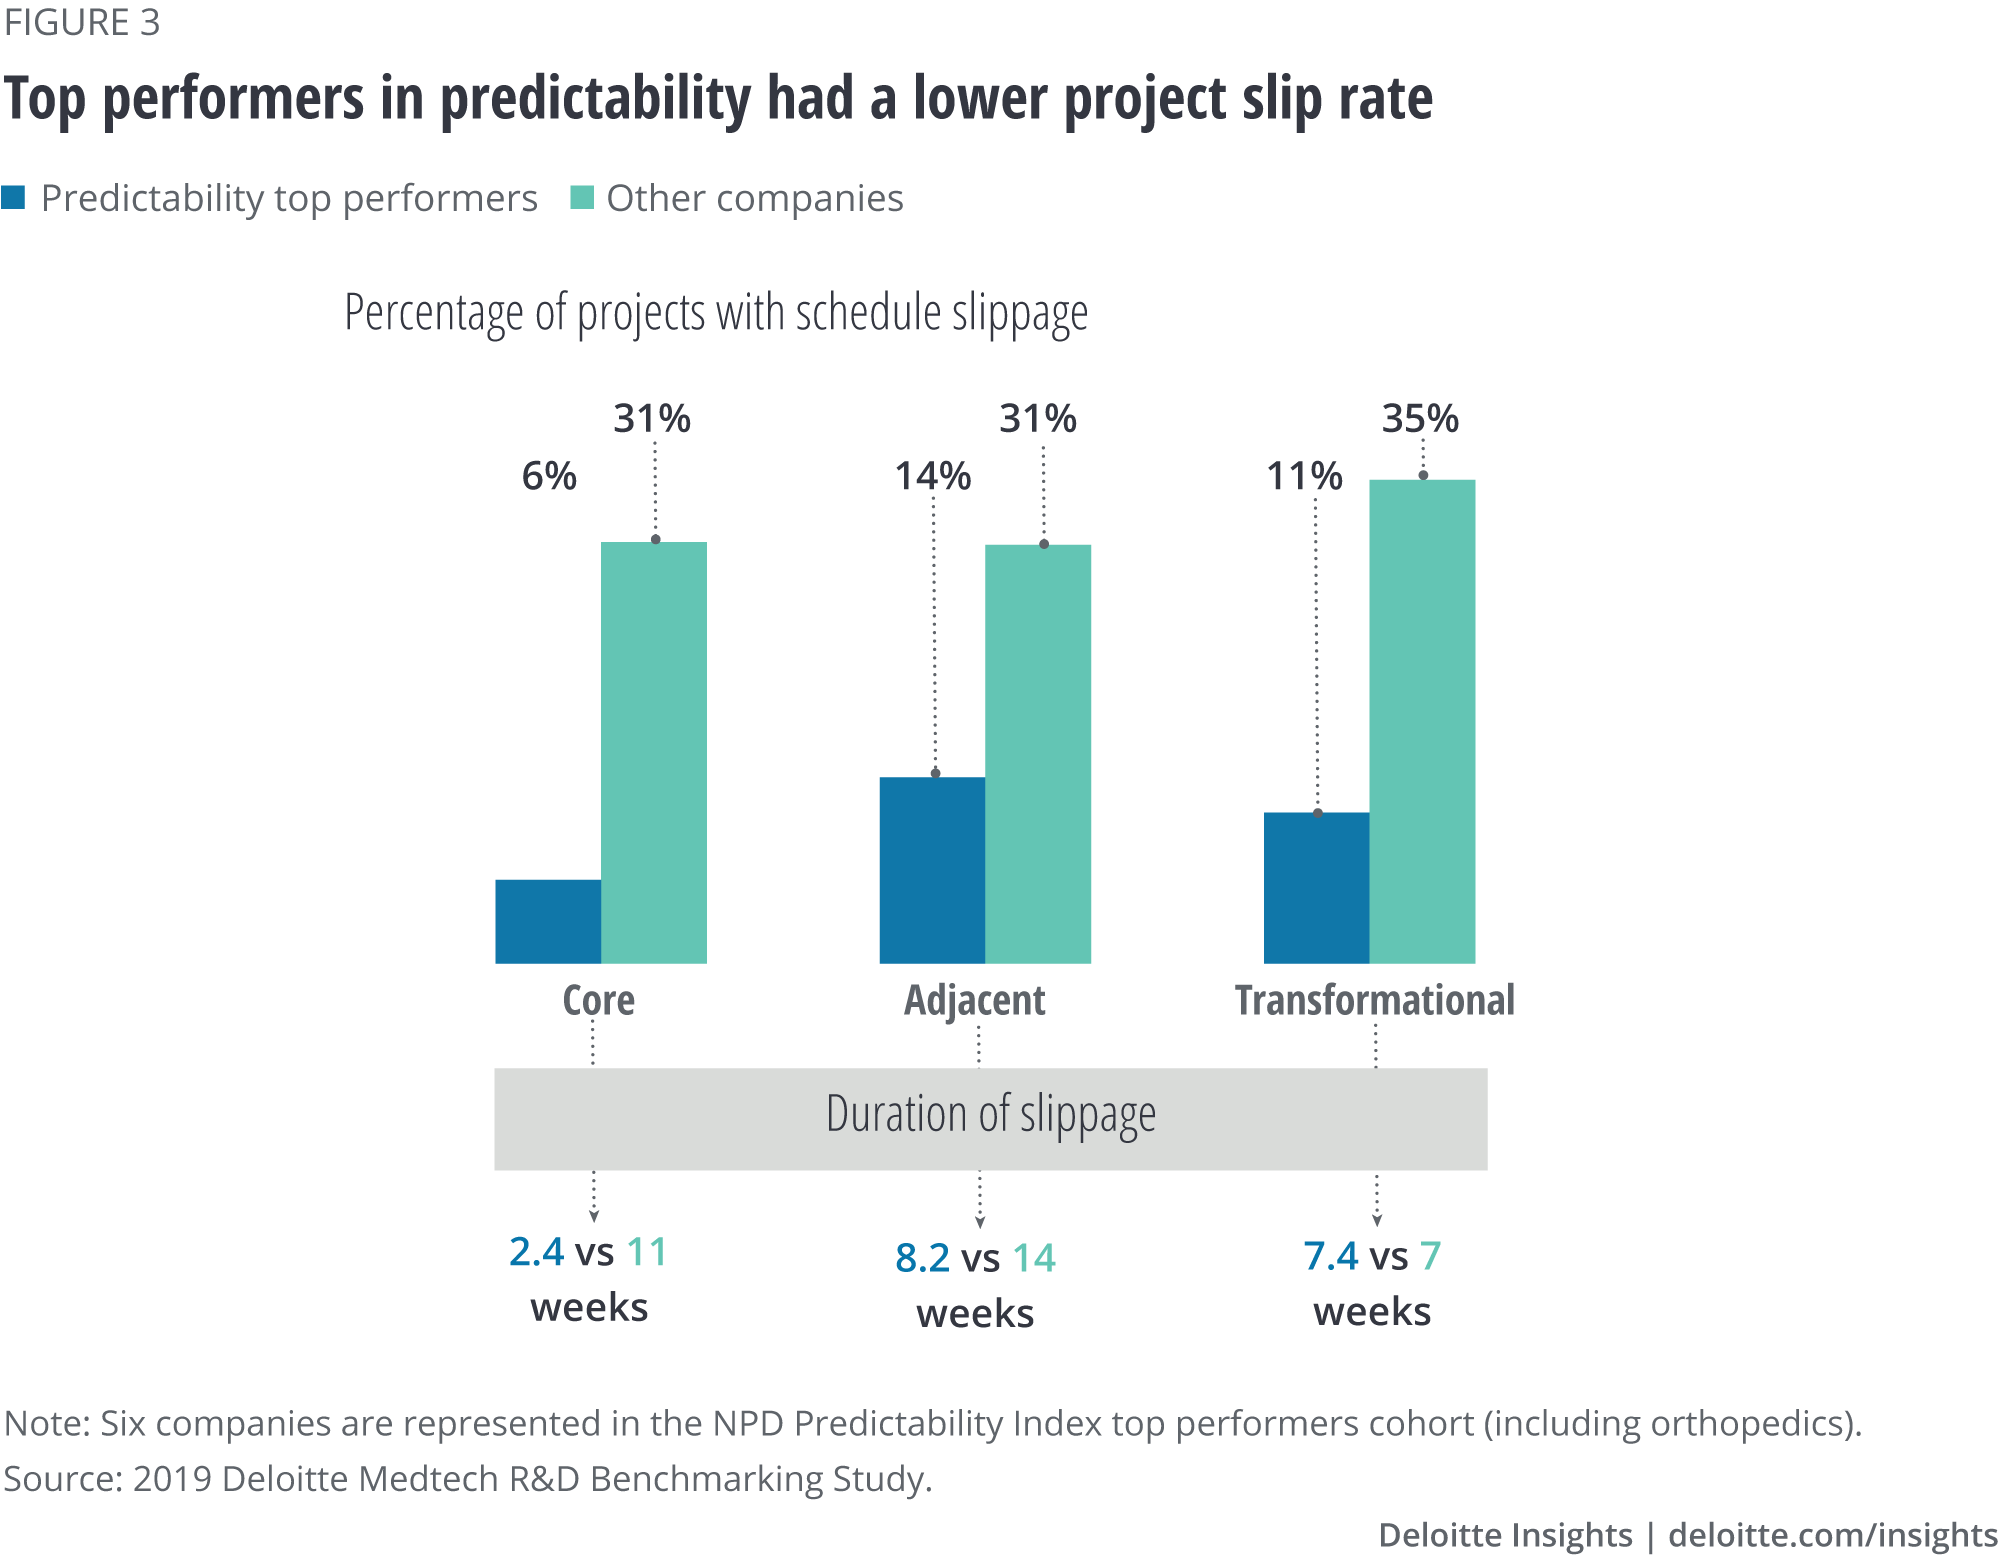 Top-performing companies had a lower project slip rate